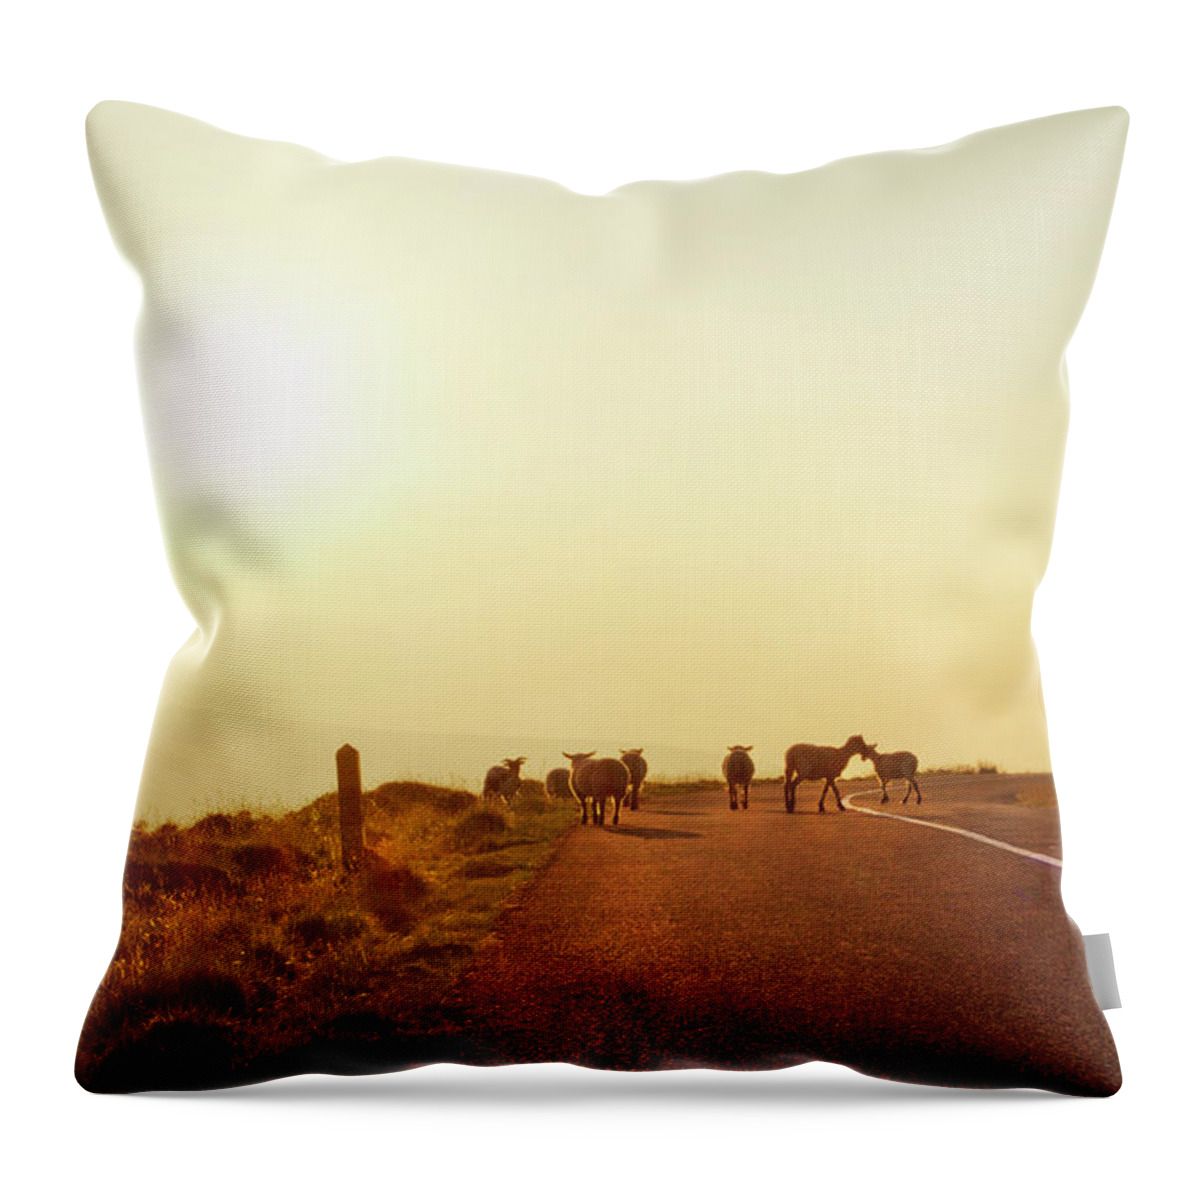 Dublin Throw Pillow featuring the photograph Dublin Mountain Road In Summer by Image By Catherine Macbride